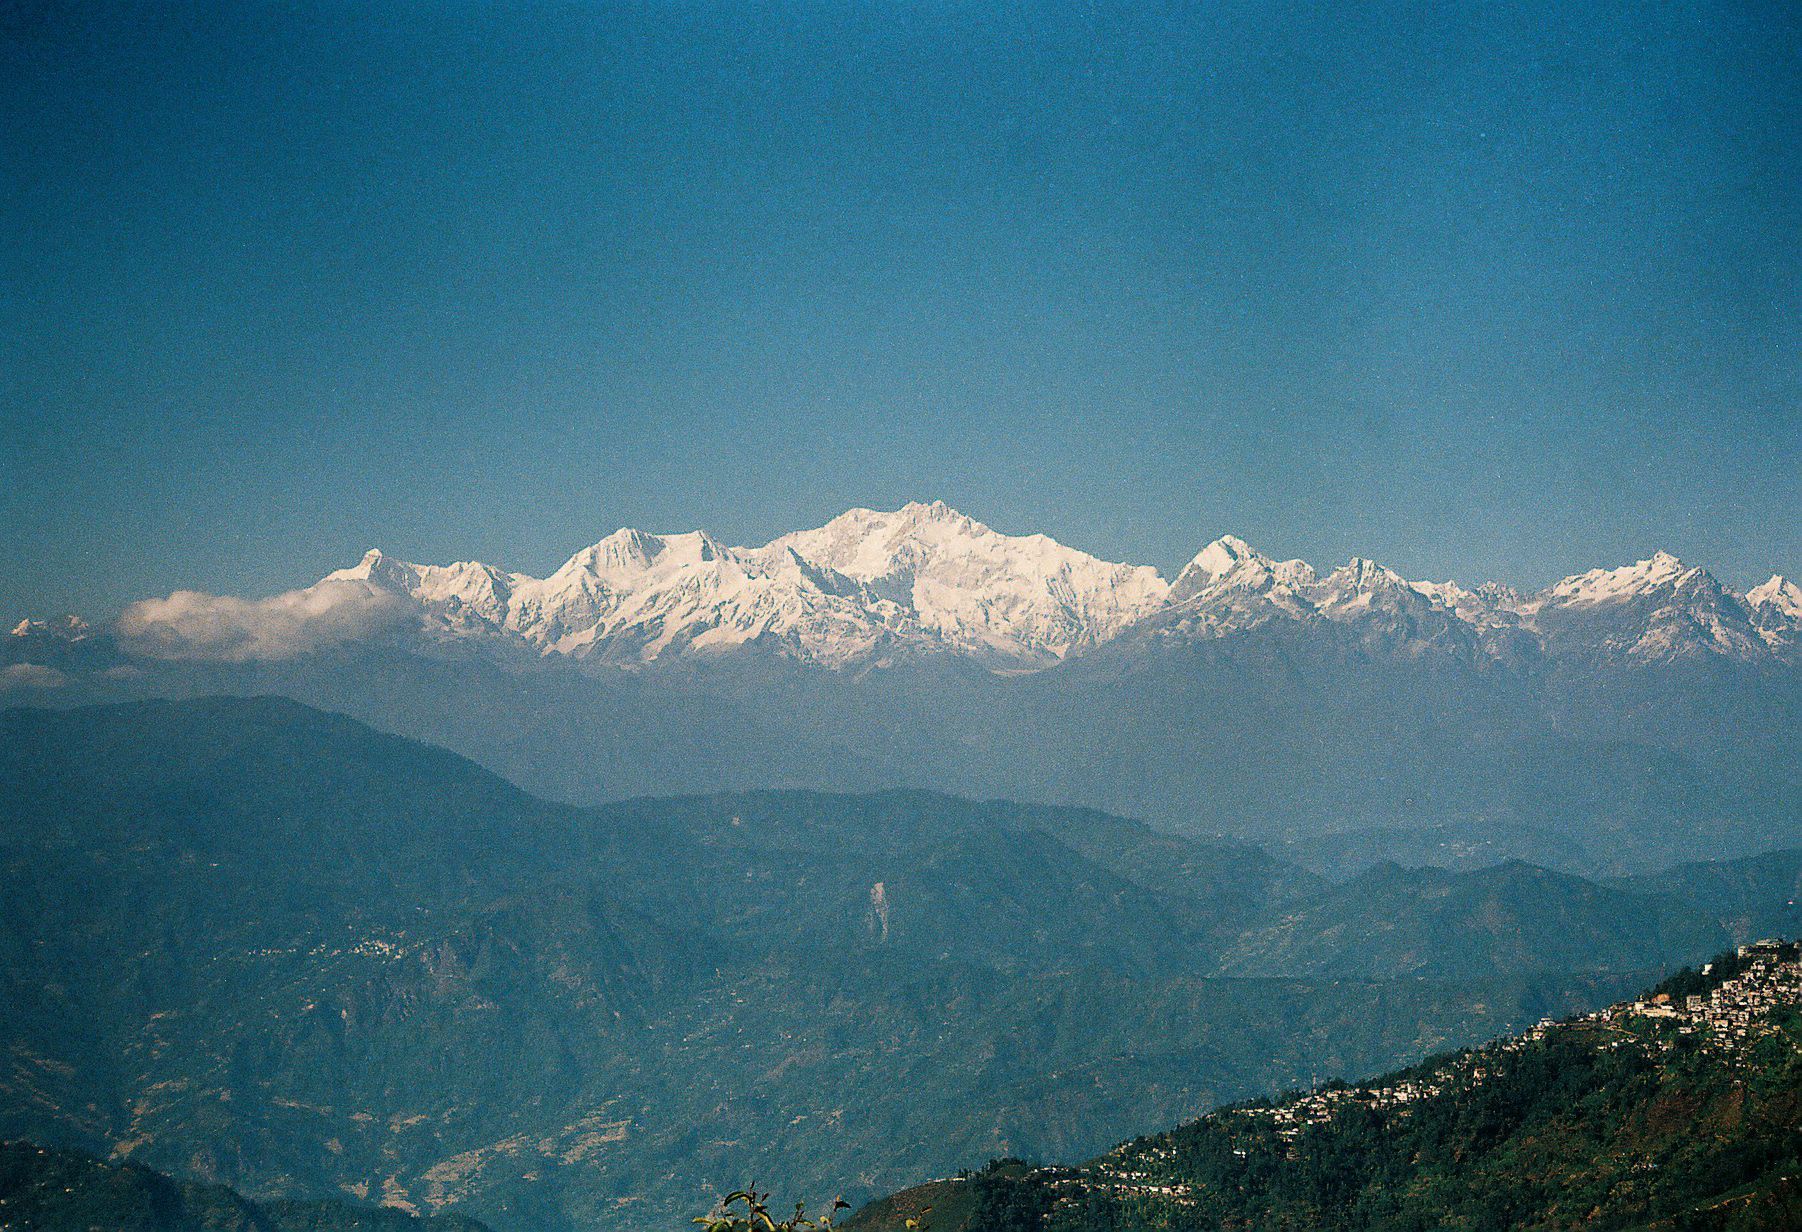 Kanchenjunga as seen from Darjeeling India. Cool places to visit